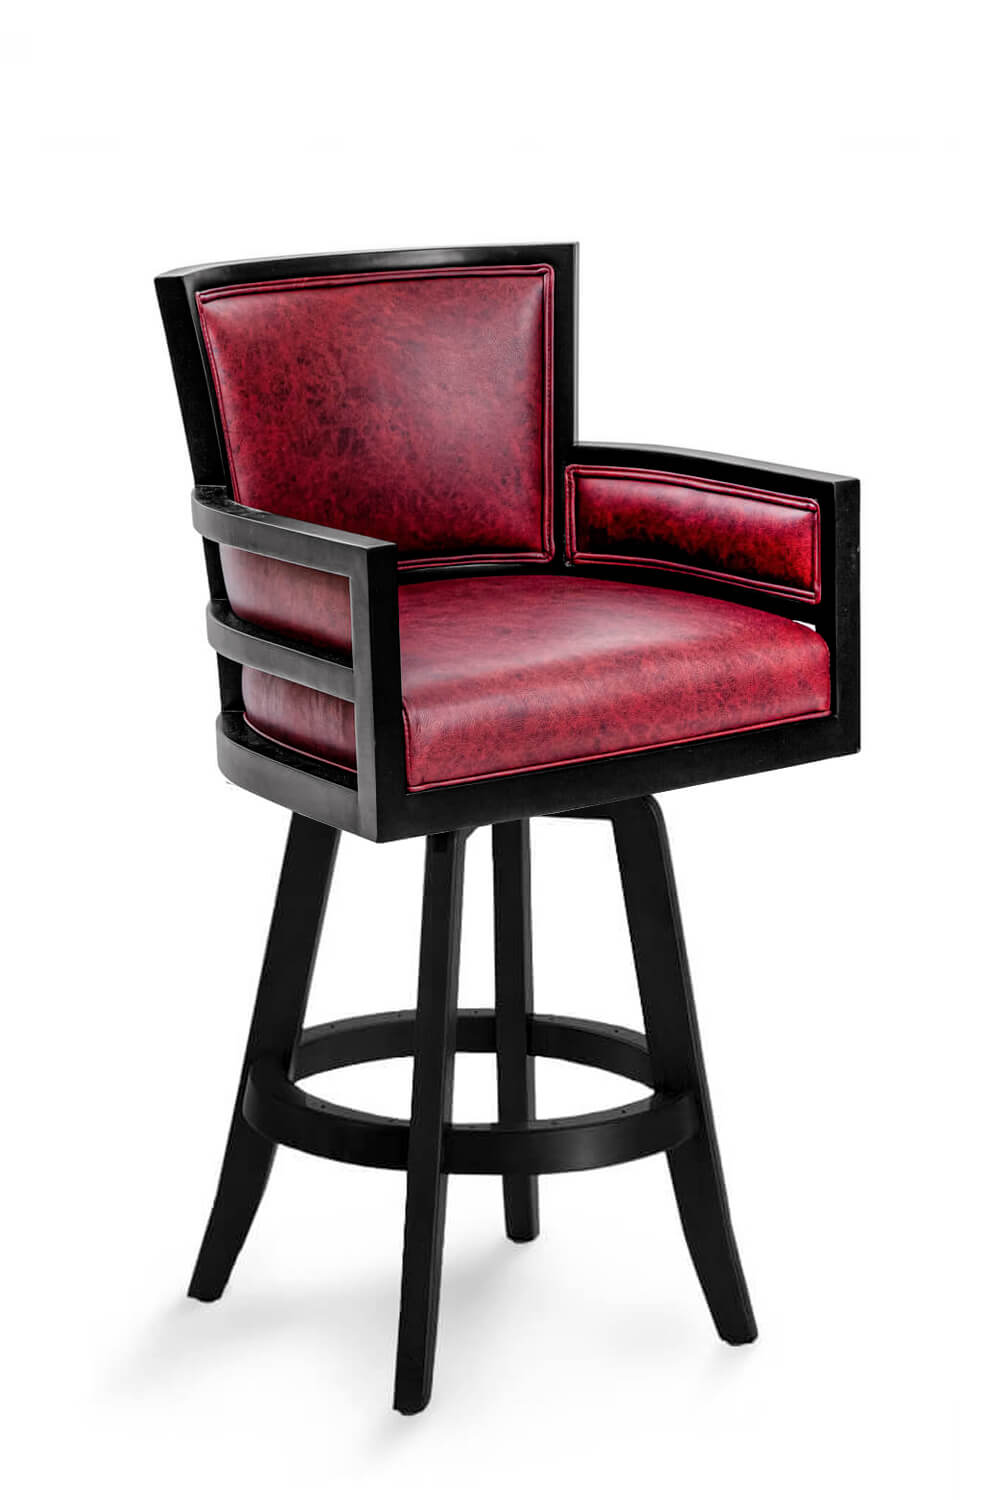 Metra Upholstered Wood Swivel Stool, Black Leather Bar Stools With Arms